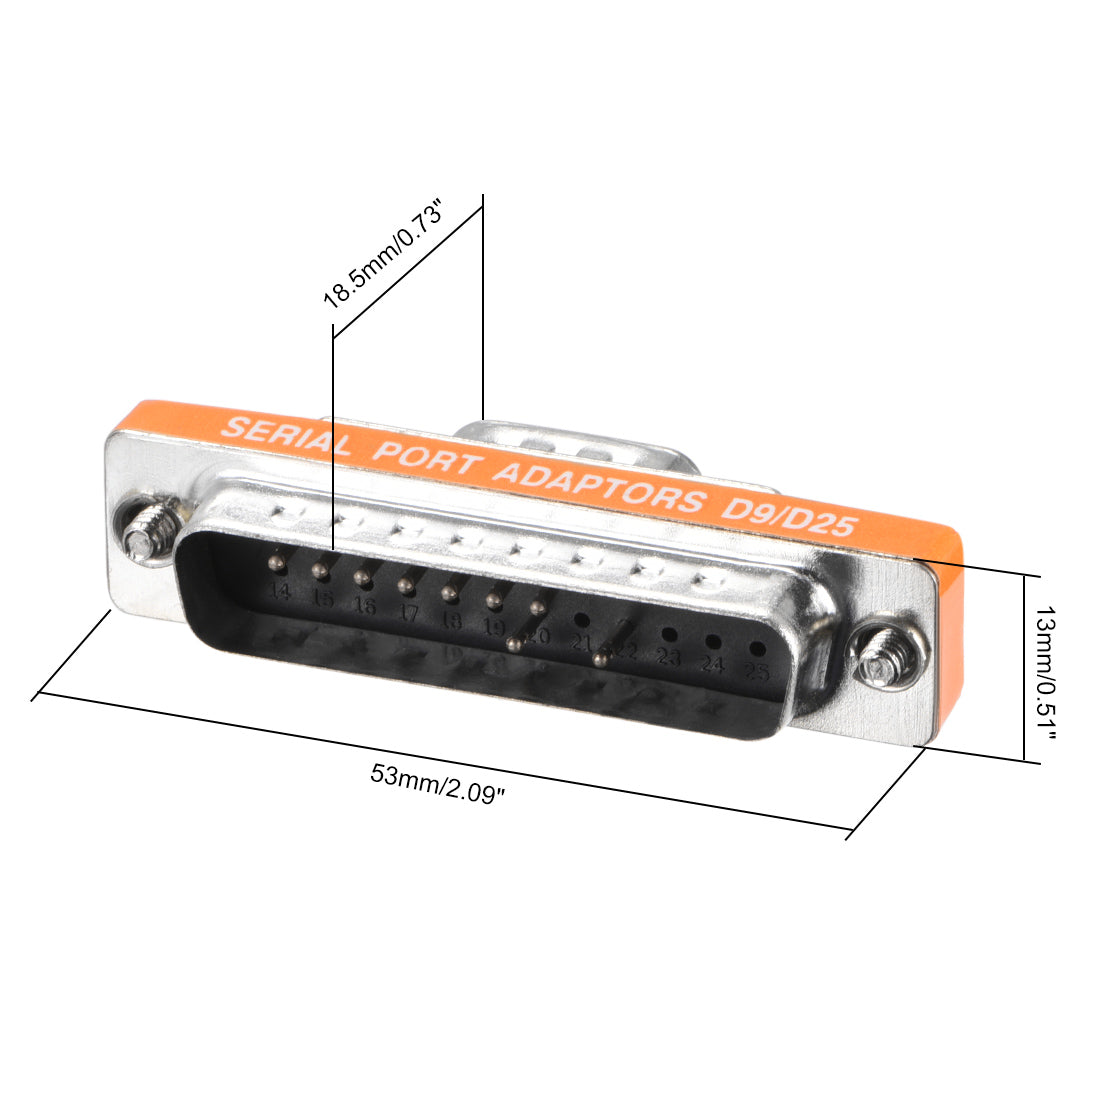 uxcell Uxcell DB25 Male to DB9 VGA Gender Changer 18 PinMale 2-row Mini Gender Changer Coupler Adapter Connector for Serial Applications Orange